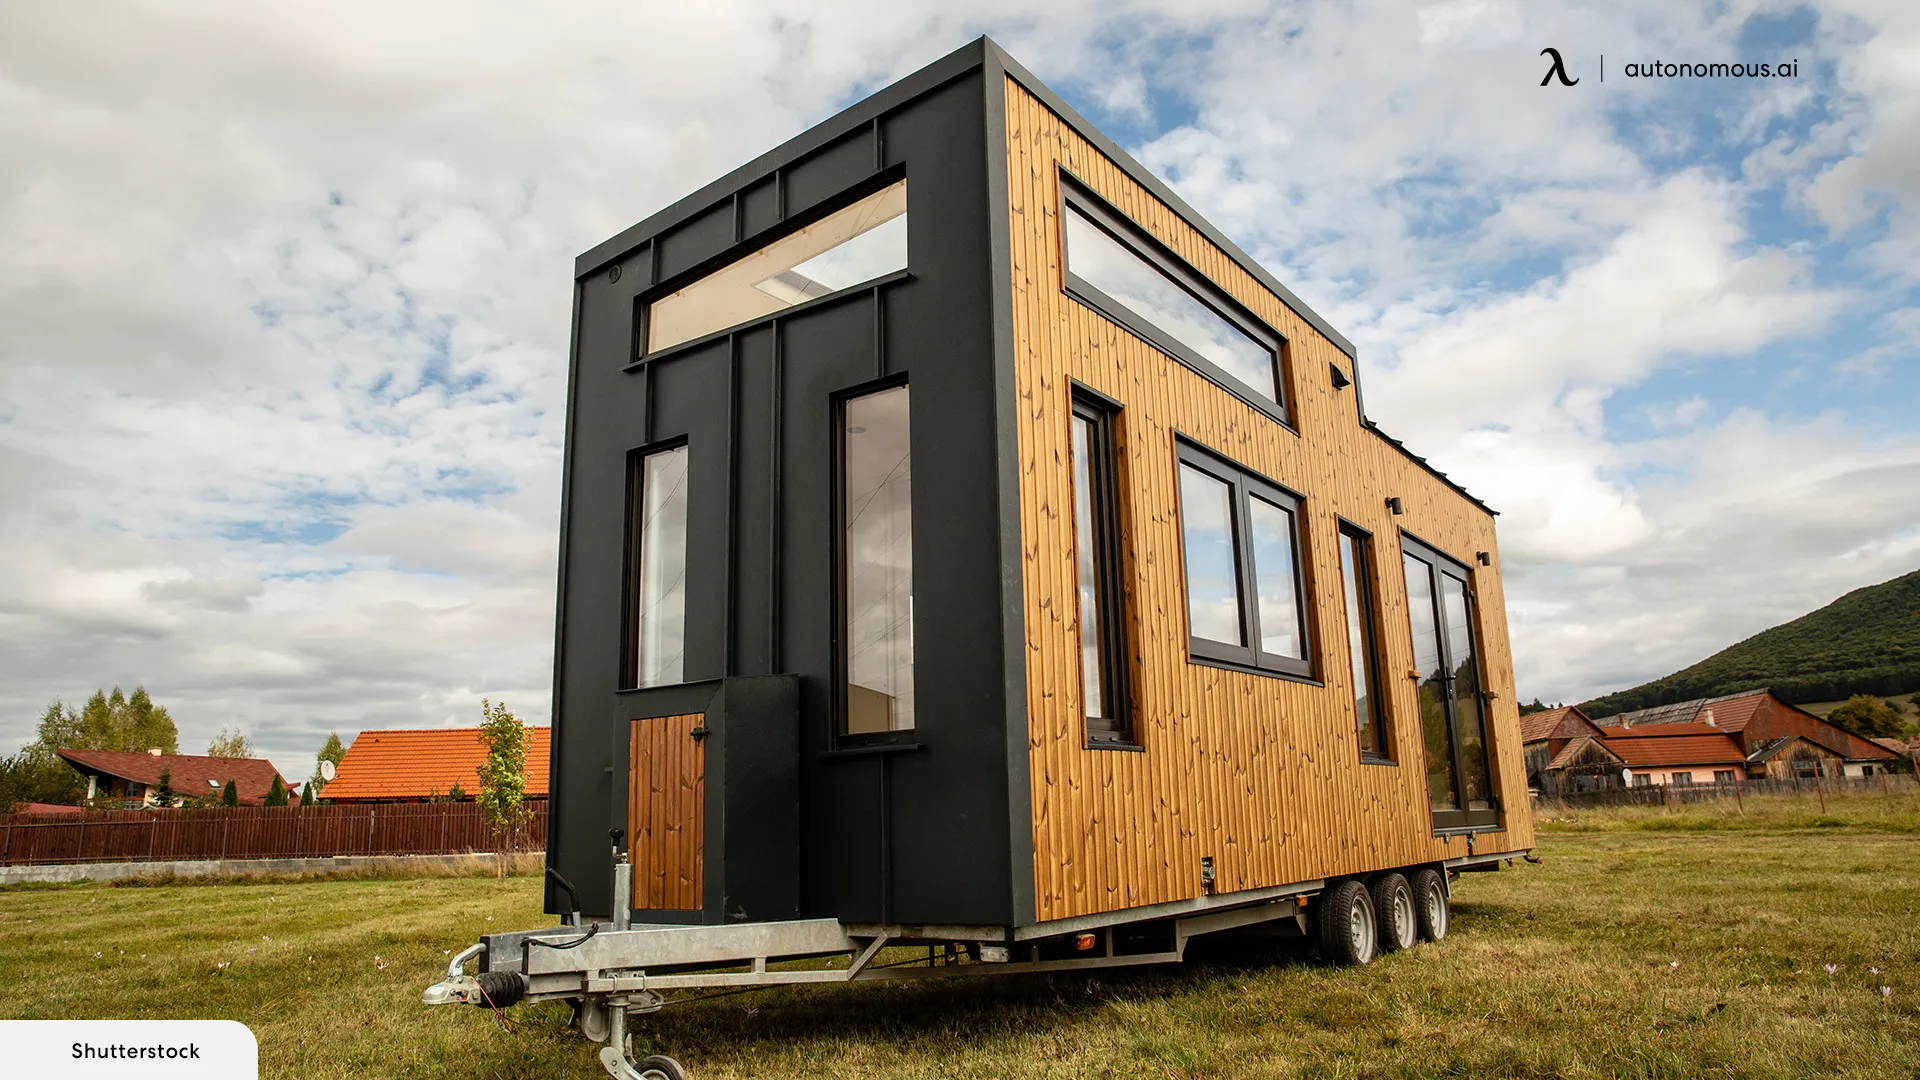 Tips for Hosting a Tiny House for Airbnb – Tiny Houses 101